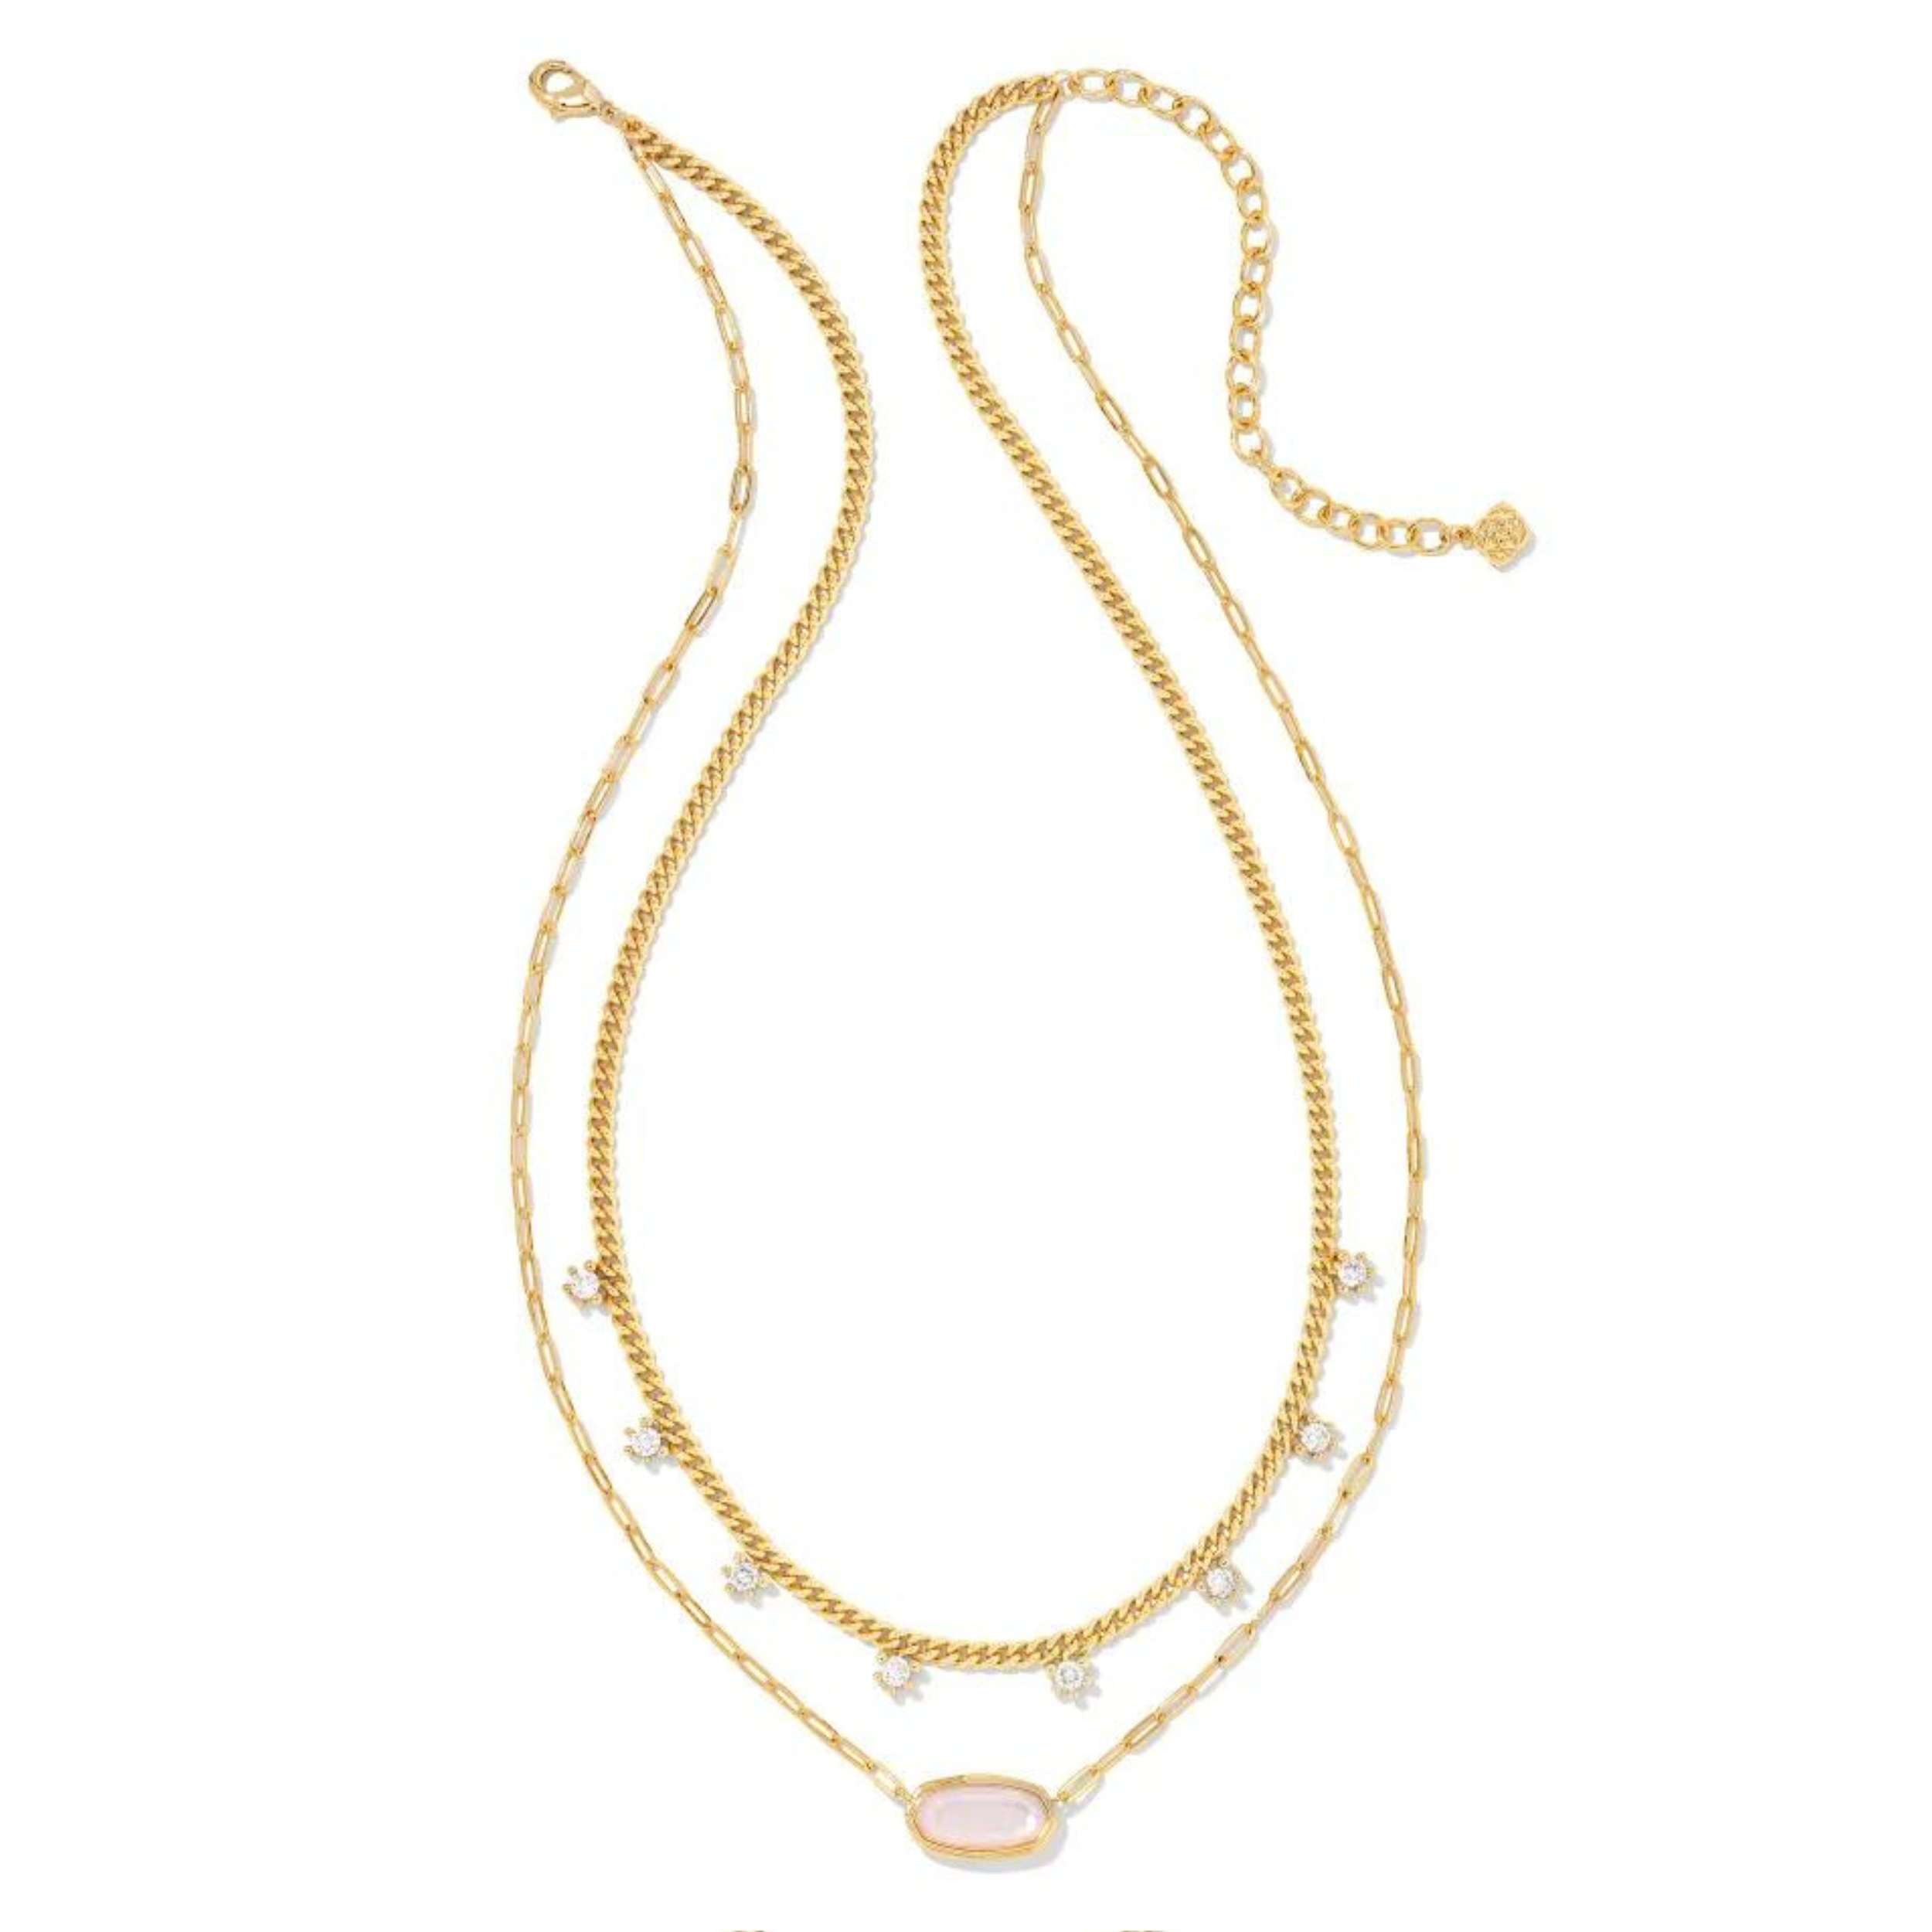 Kendra Scott | Framed Elisa Gold Multi Strand Necklace in Pink Opalite Illusion - Giddy Up Glamour Boutique